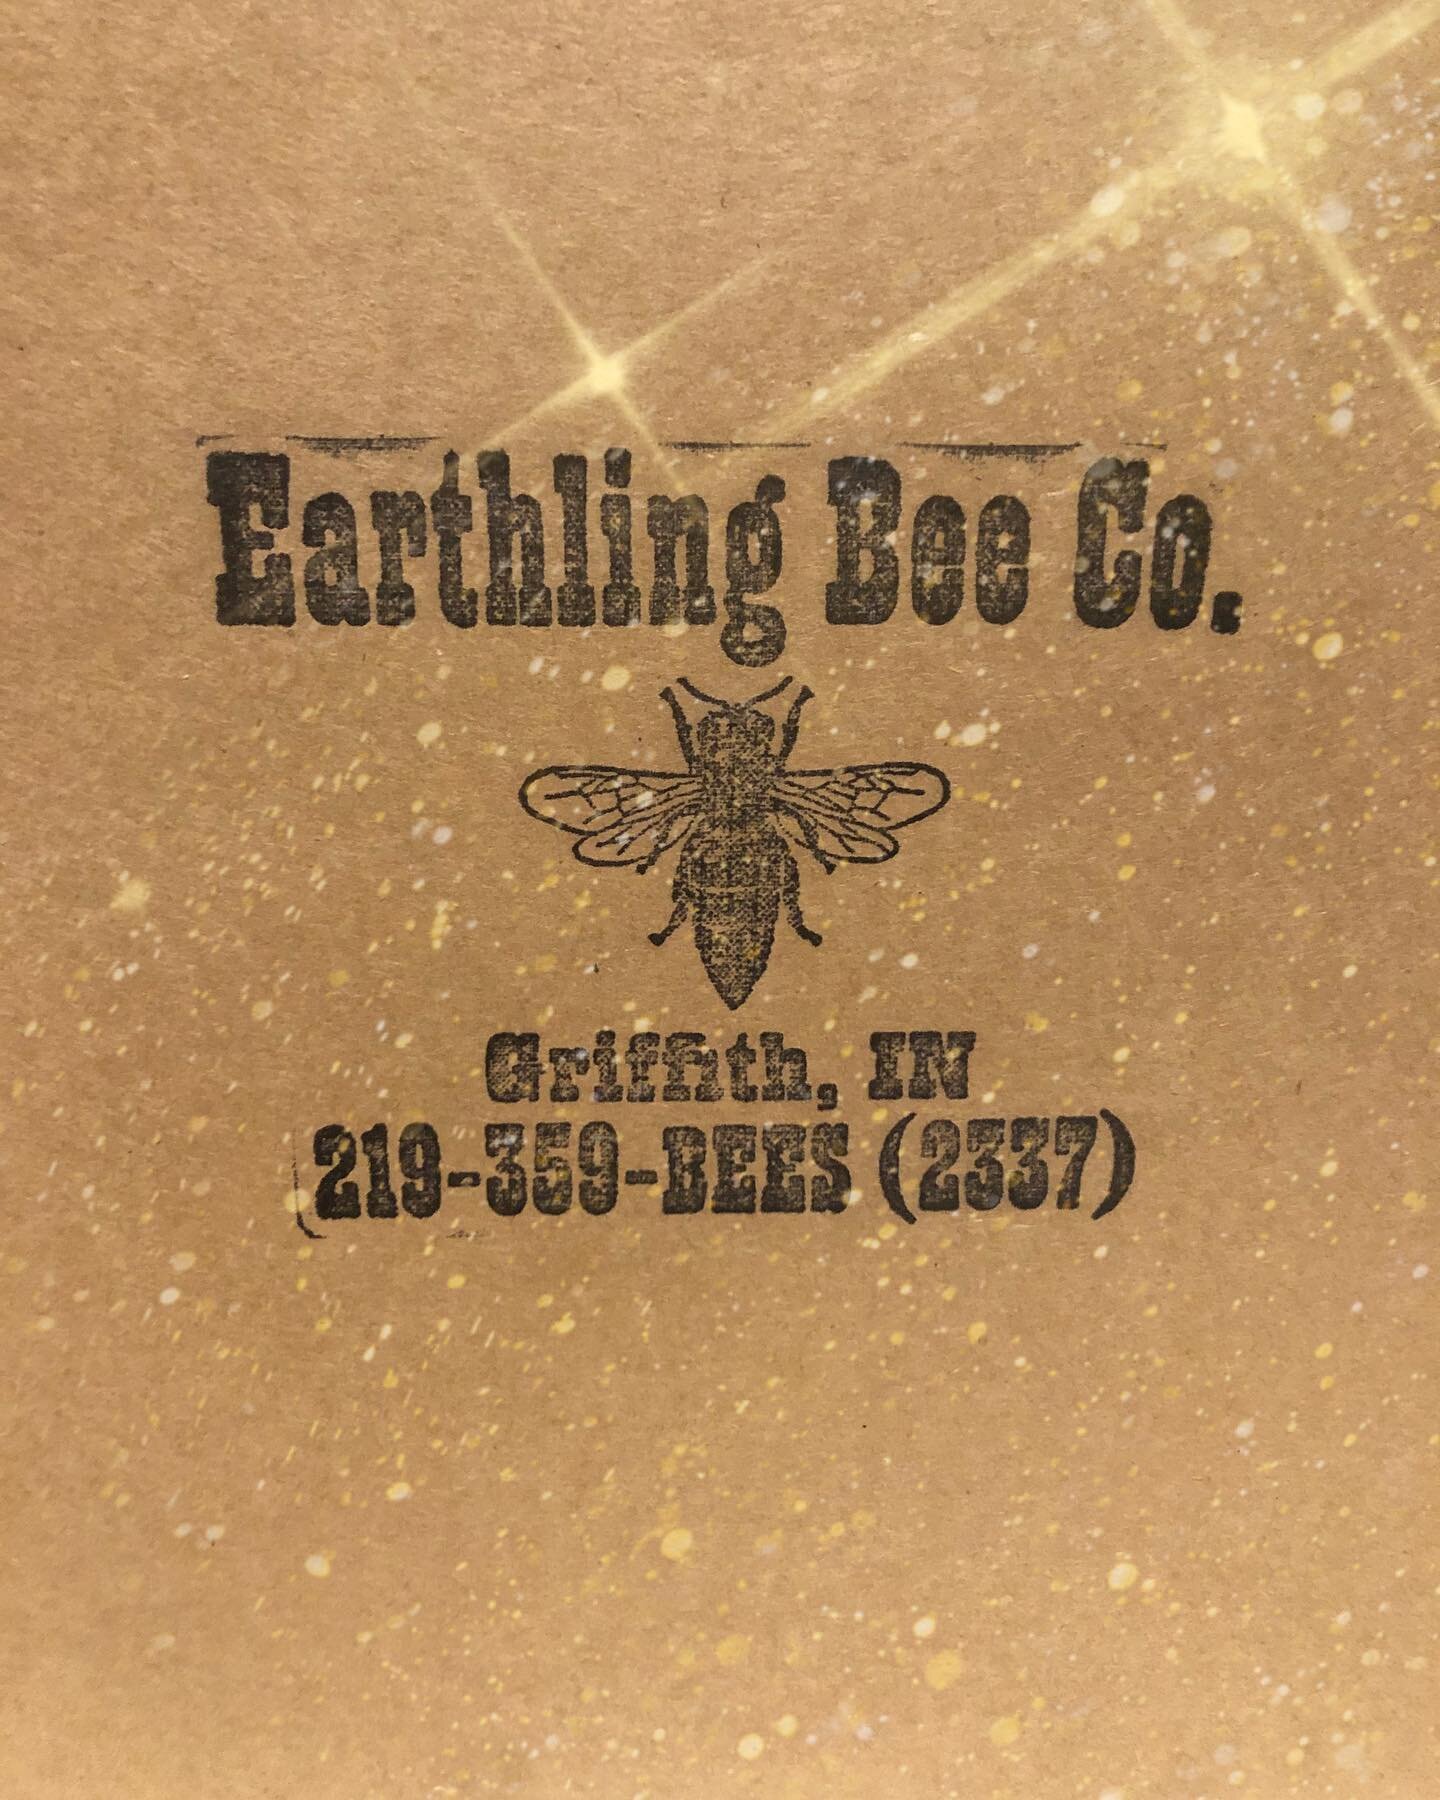 New and exciting things coming to @wildwitchpreserves from the incredibly kind and talented bee keeps @earthlingbeeco